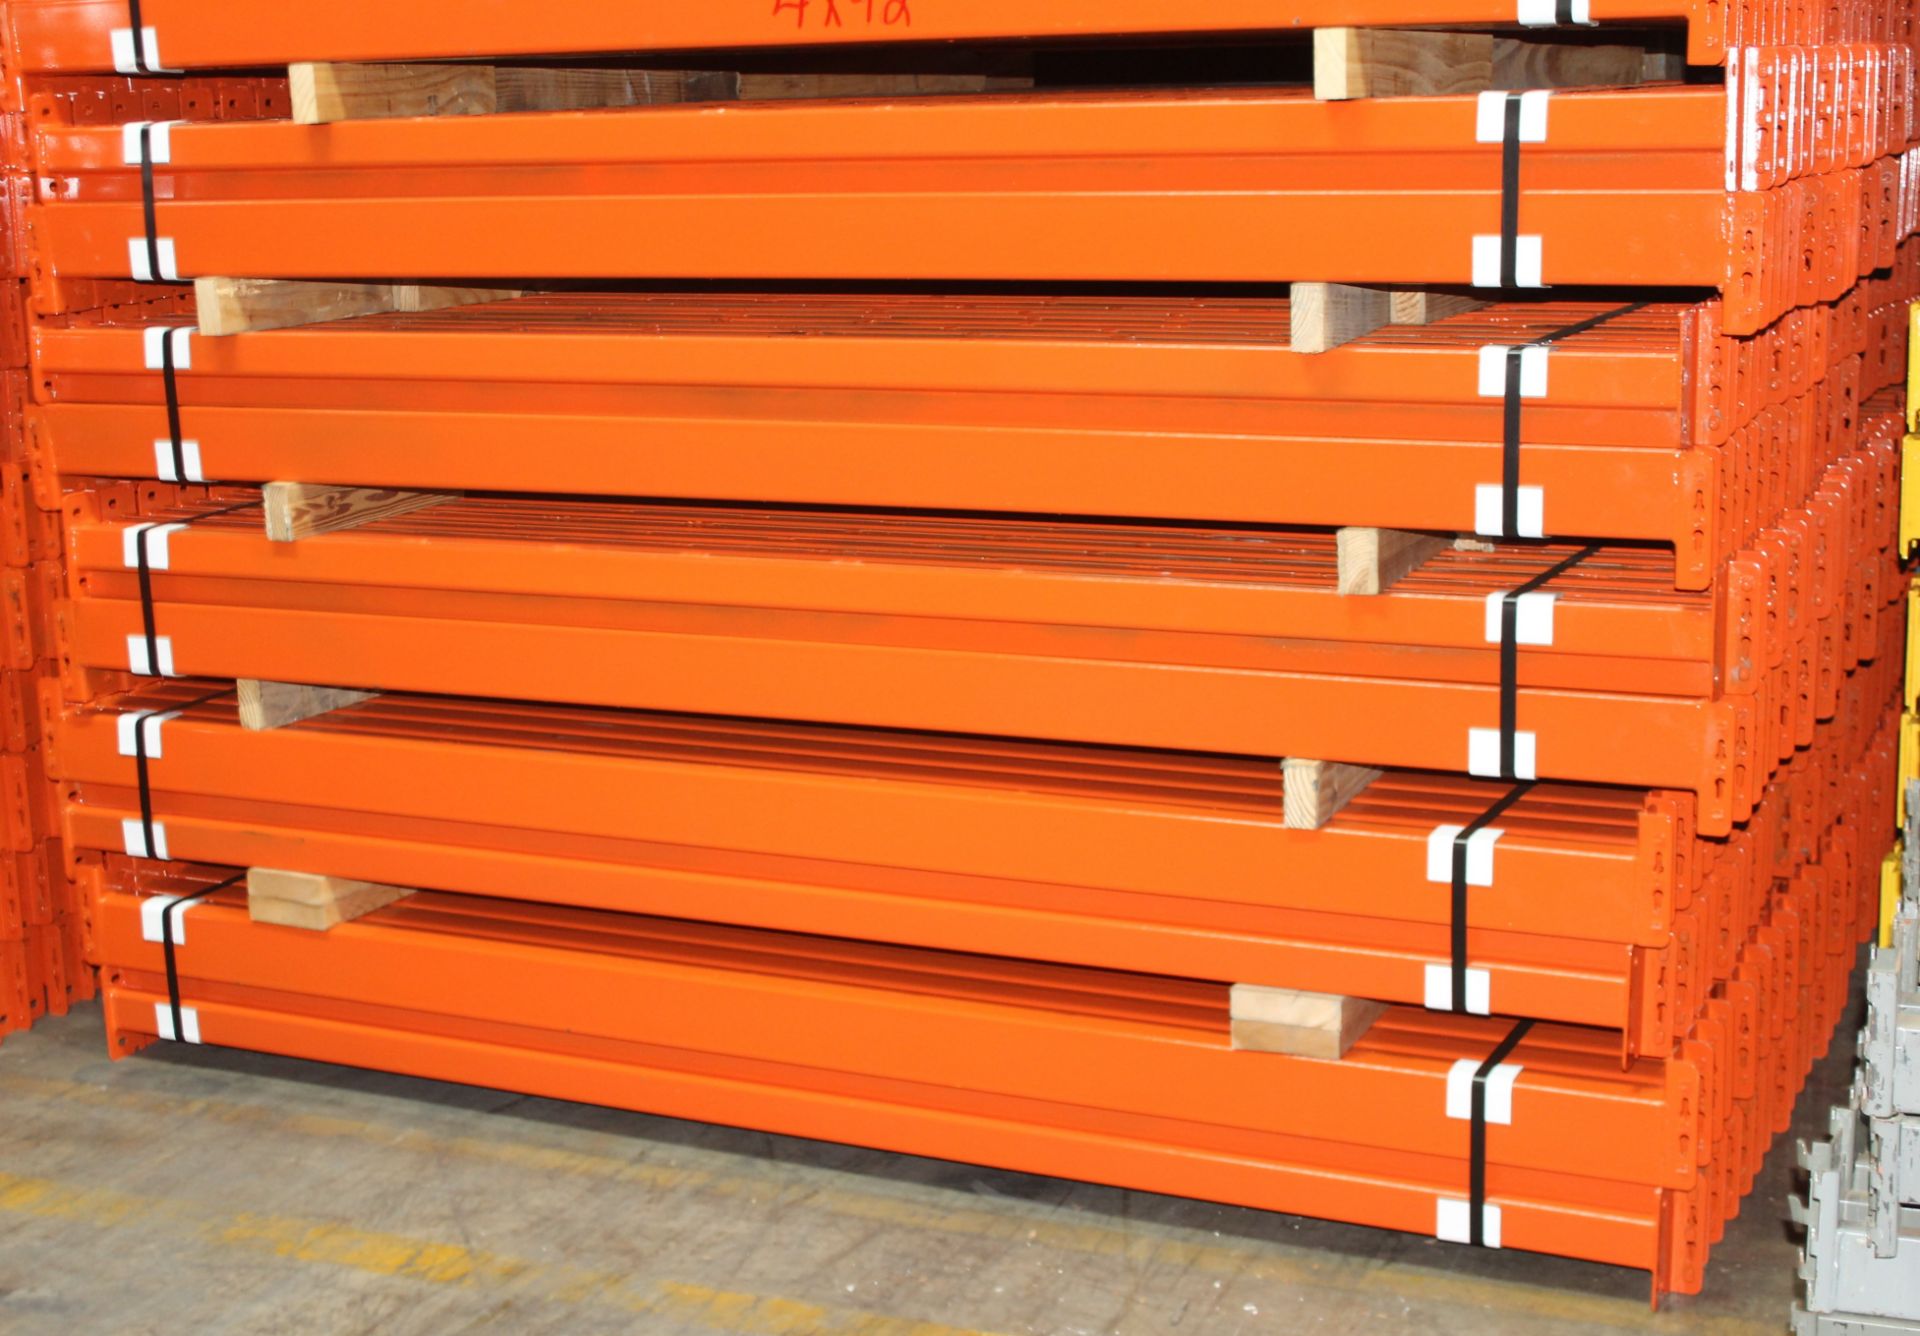 LIKE NEW TEAR DROP STYLE PALLET RACK WITH WIRE DECKING. SIZE: 144"H X 96"L X 42"D, FULL TRUCK LOAD - Image 4 of 5